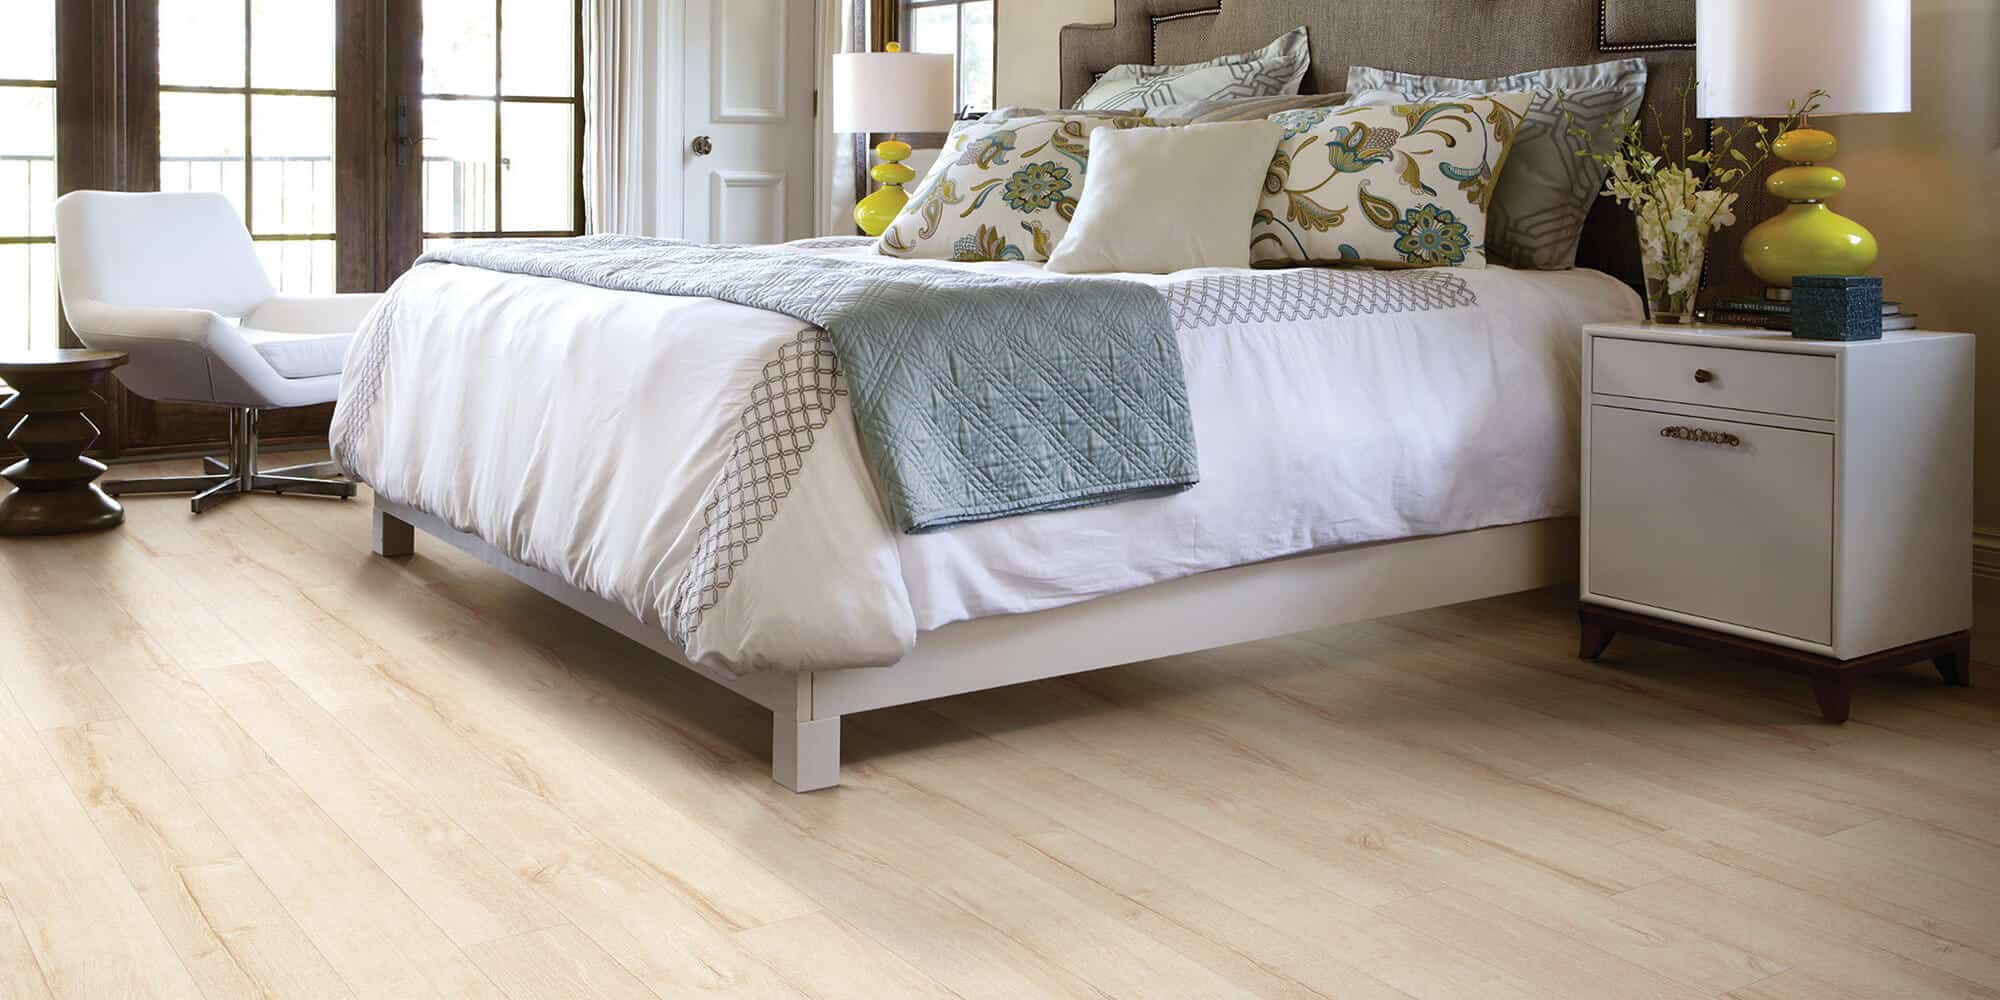 A large queen sized bed on boulevard flooring